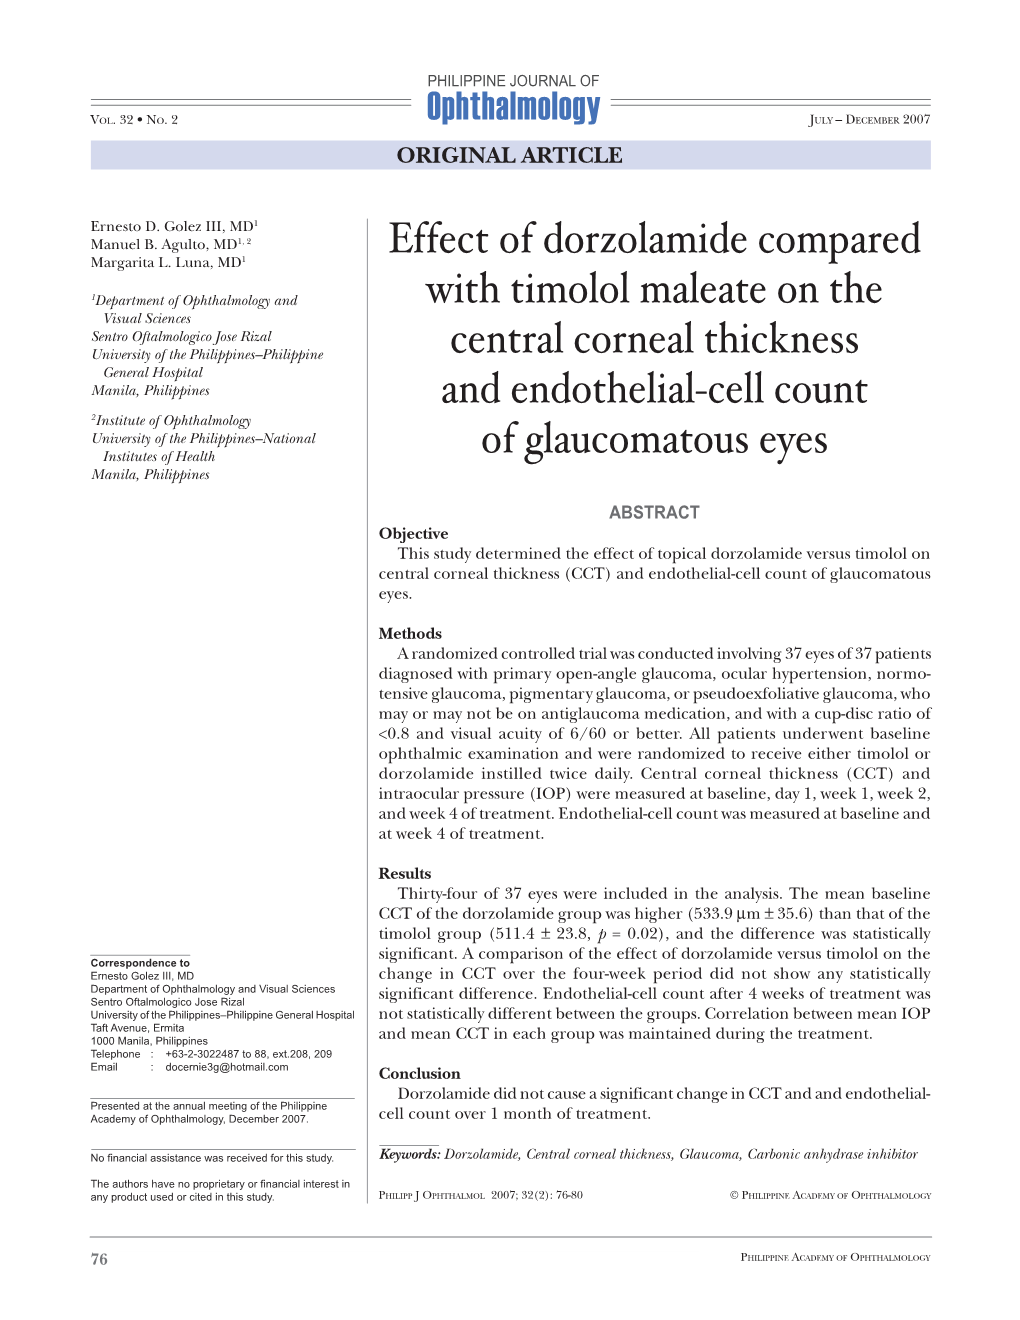 Effect of Dorzolamide Compared with Timolol Maleate on the Central Corneal Thickness and Endothelial-Cell Count of Glaucomatous